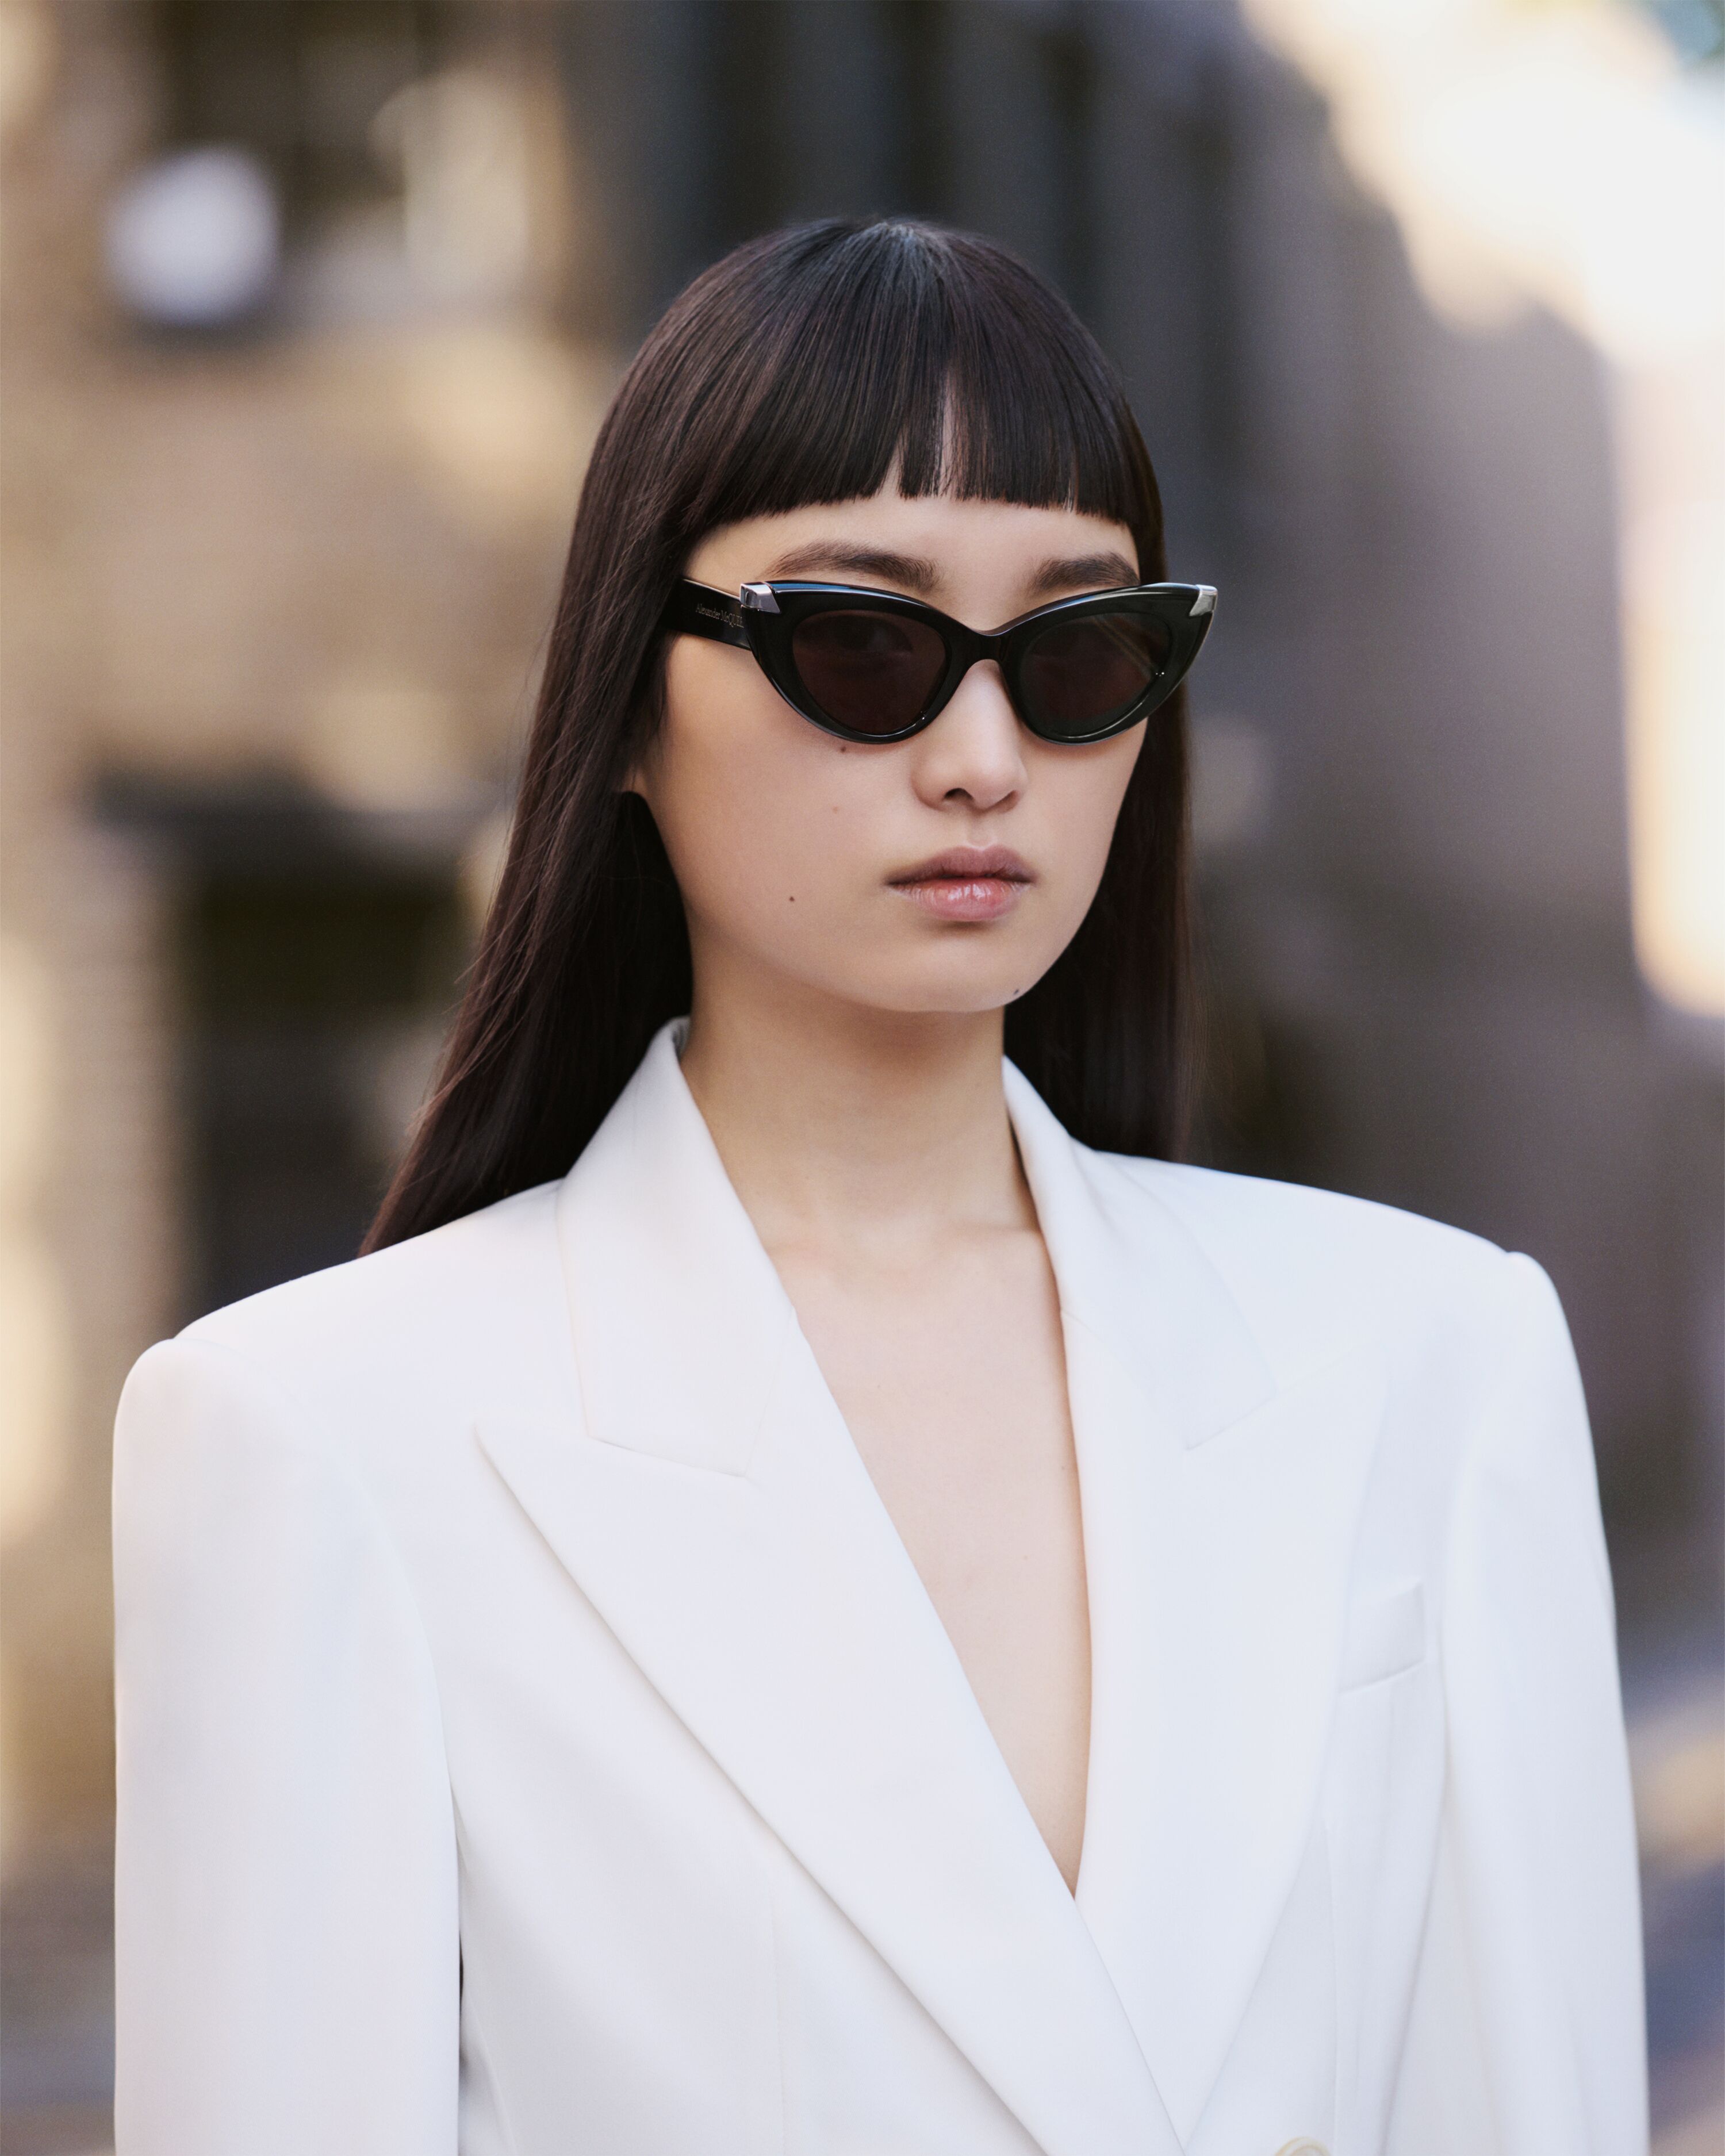 Wang with white tailored jacket and oval sunglasses